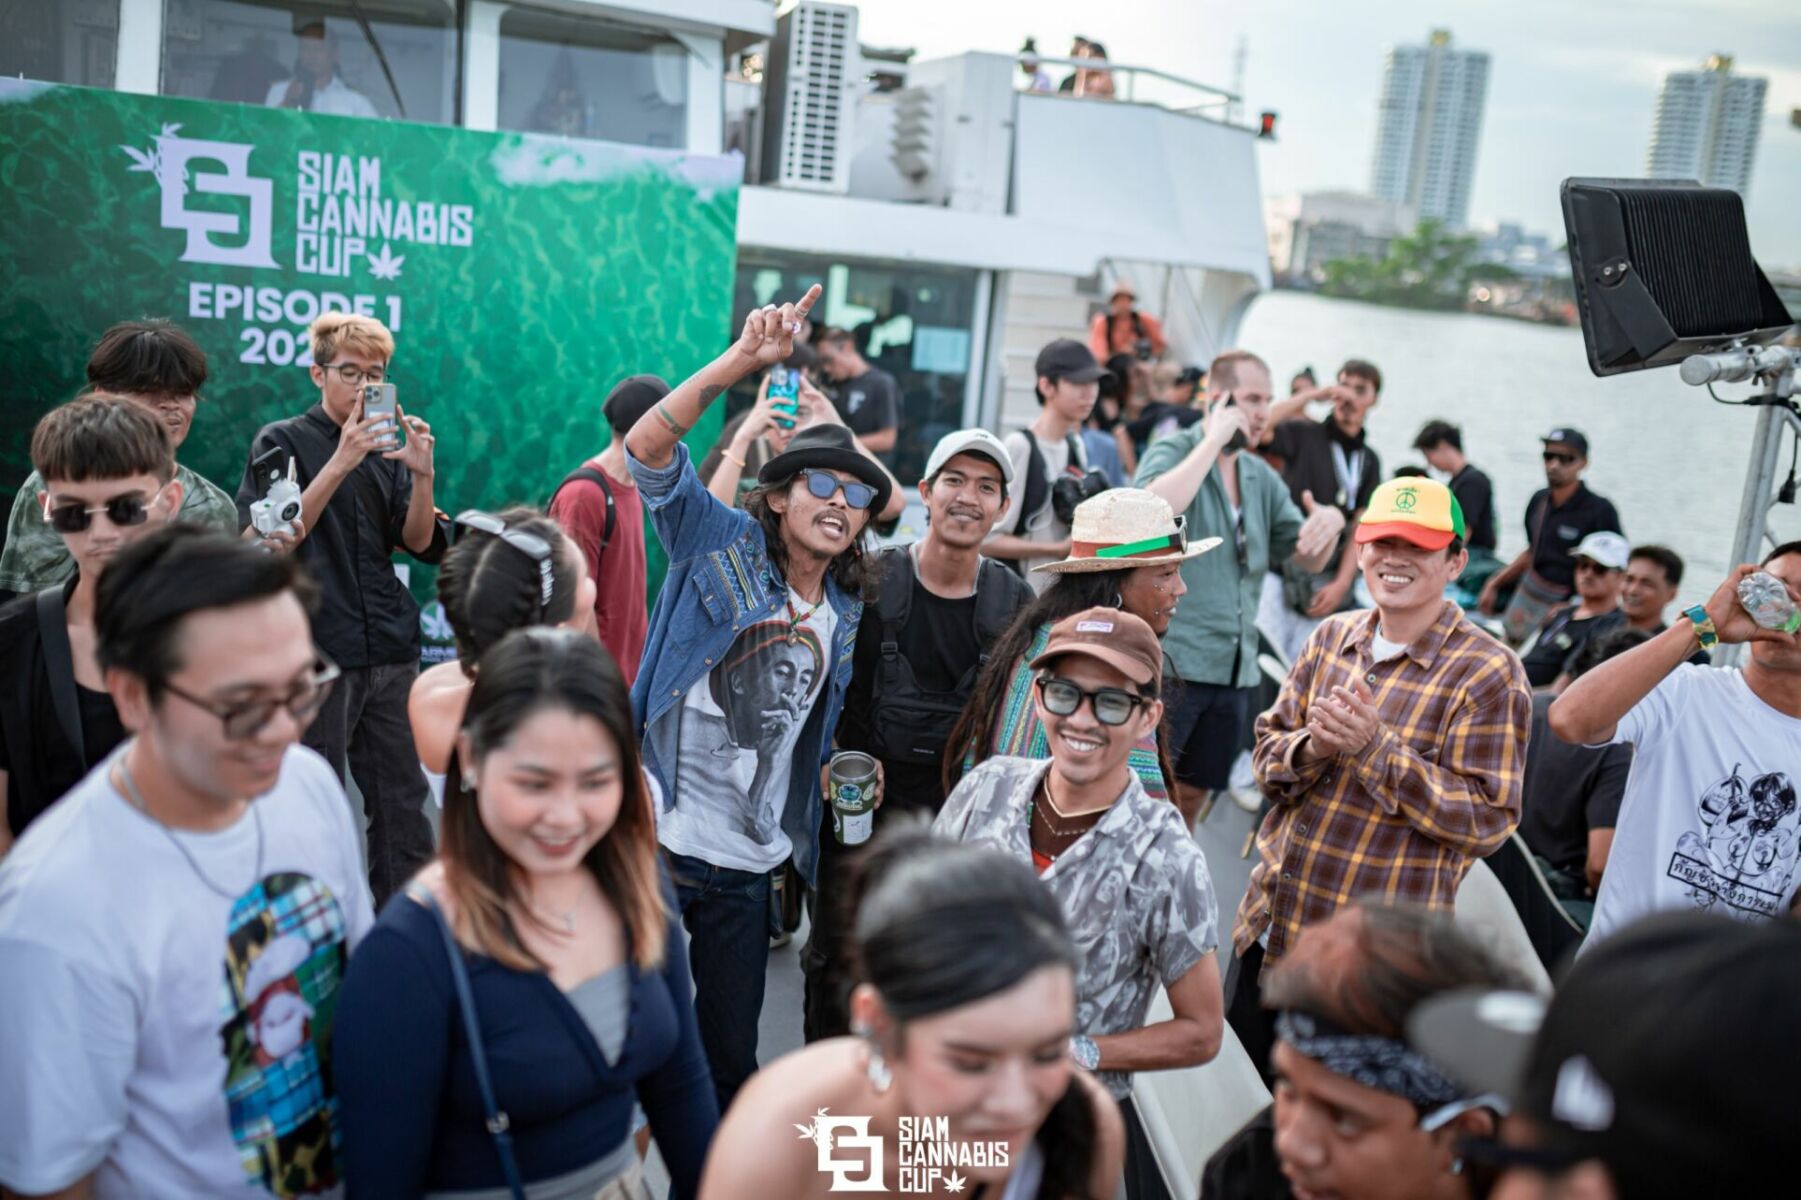 Lollipop's impact presence at the Siam Cannabis Cup Episode 1 | News by Thaiger